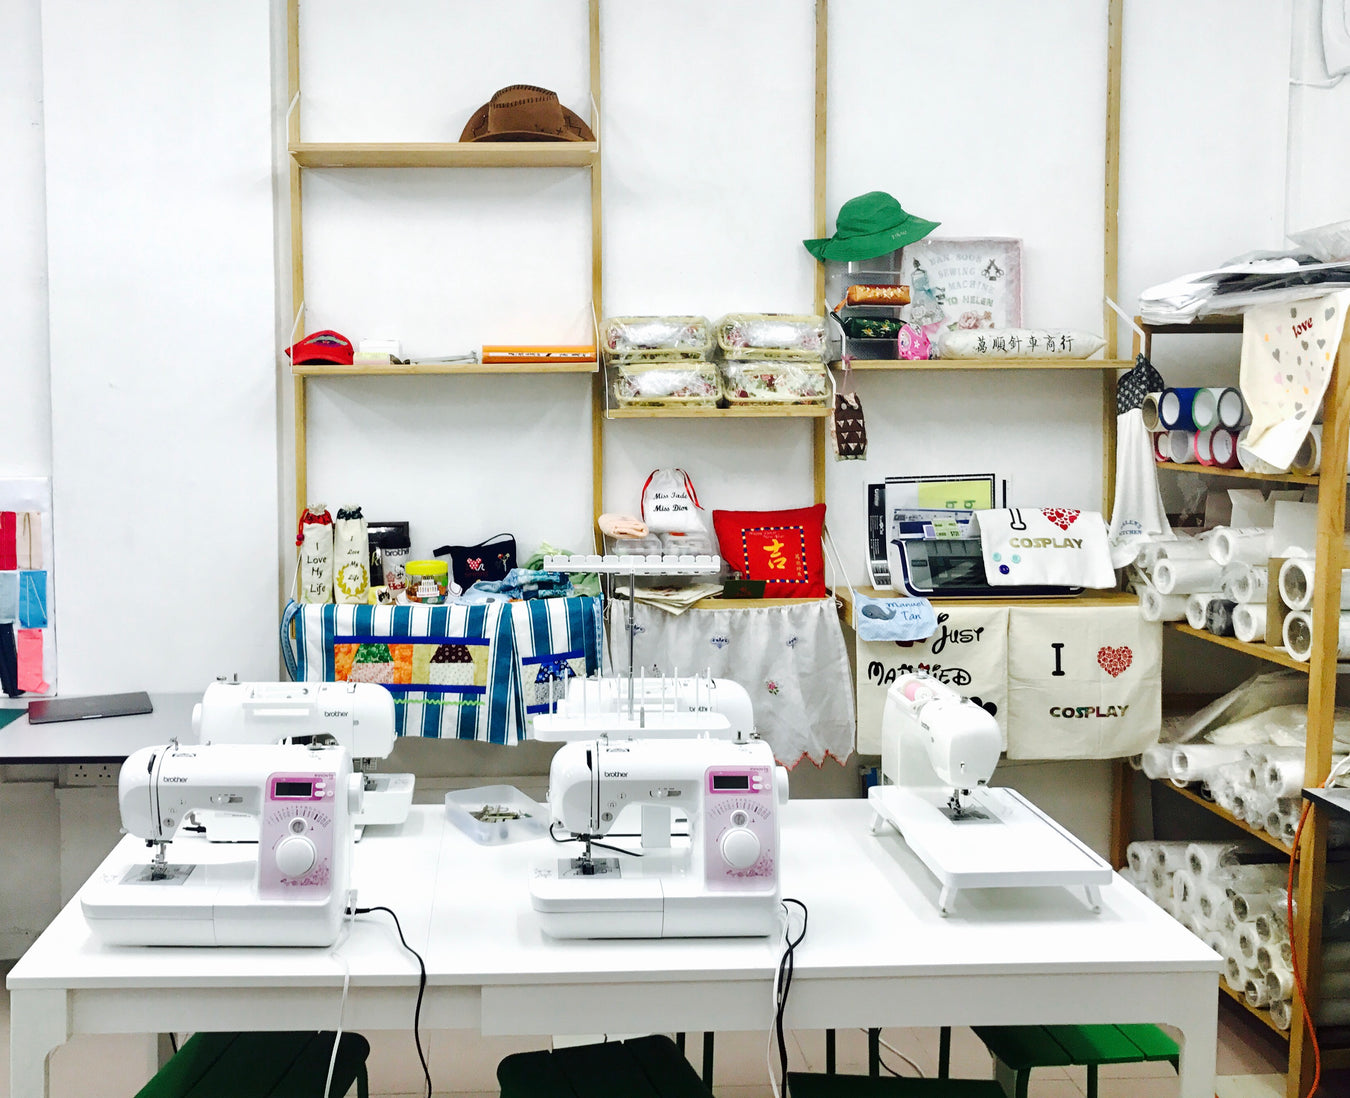 Sewing Classes & Workshop @ Clementi